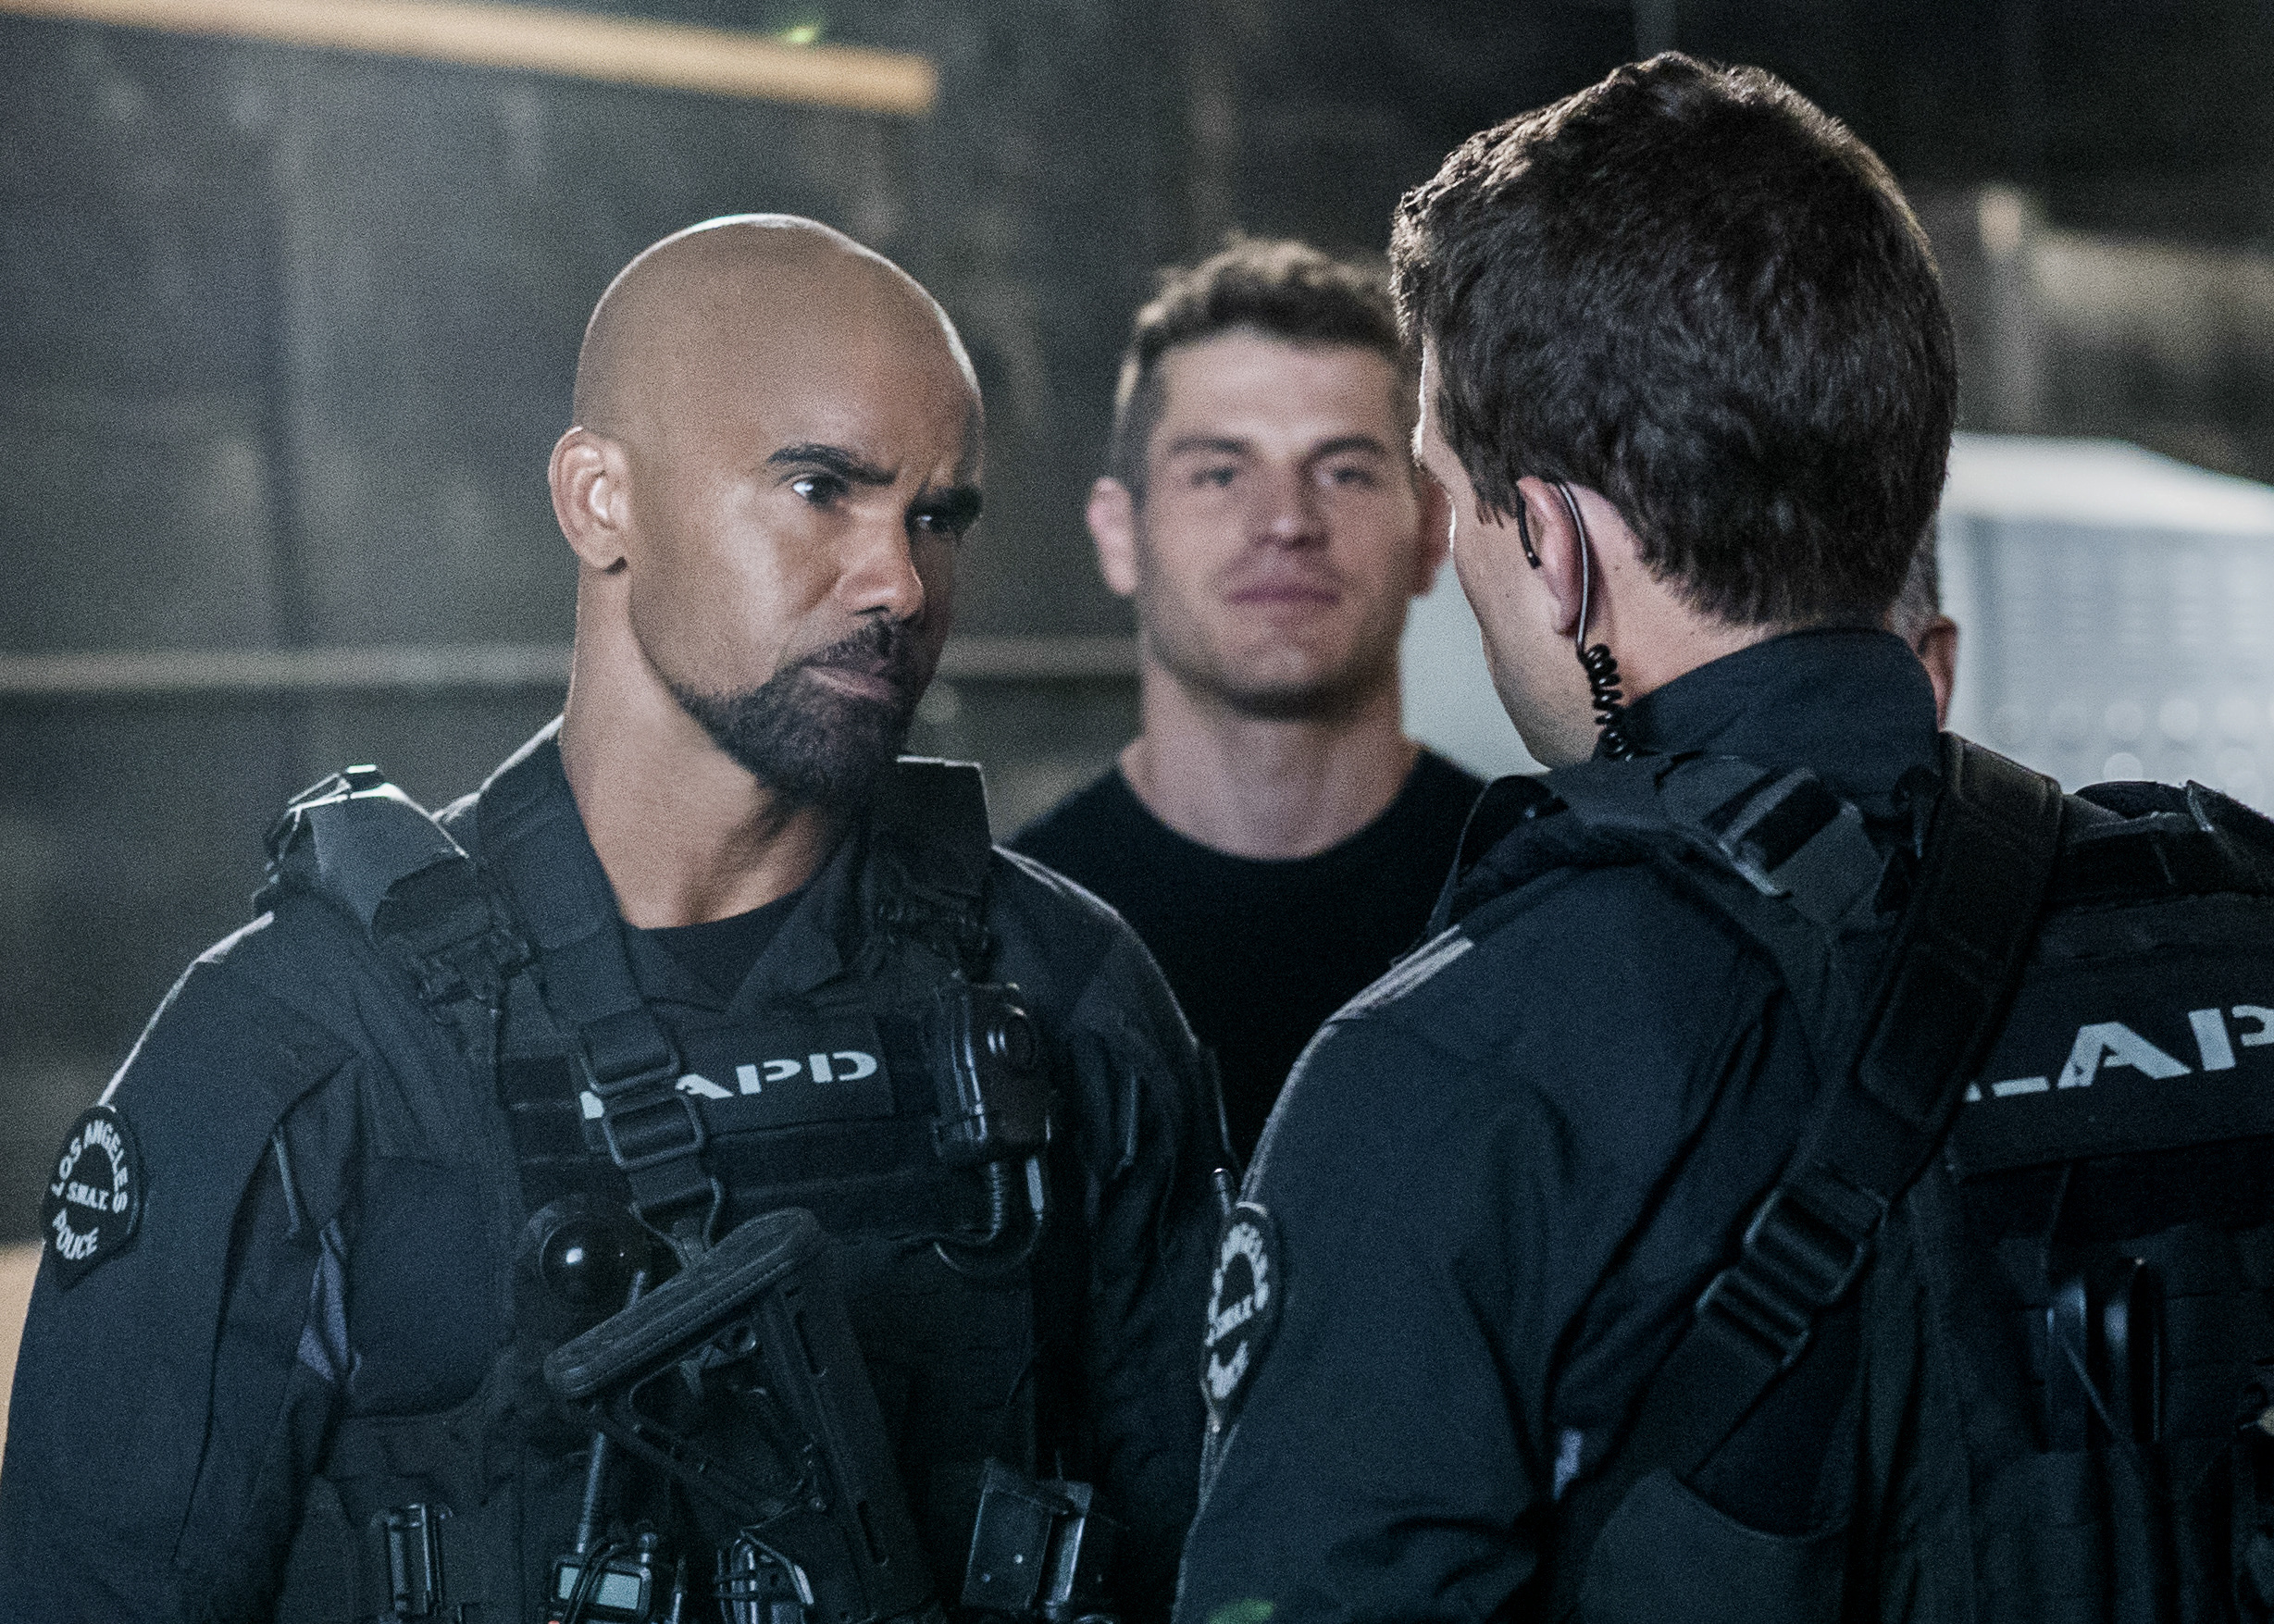 S. W. A. T., TV show revival, Intense storytelling, Critically acclaimed, 2460x1760 HD Desktop